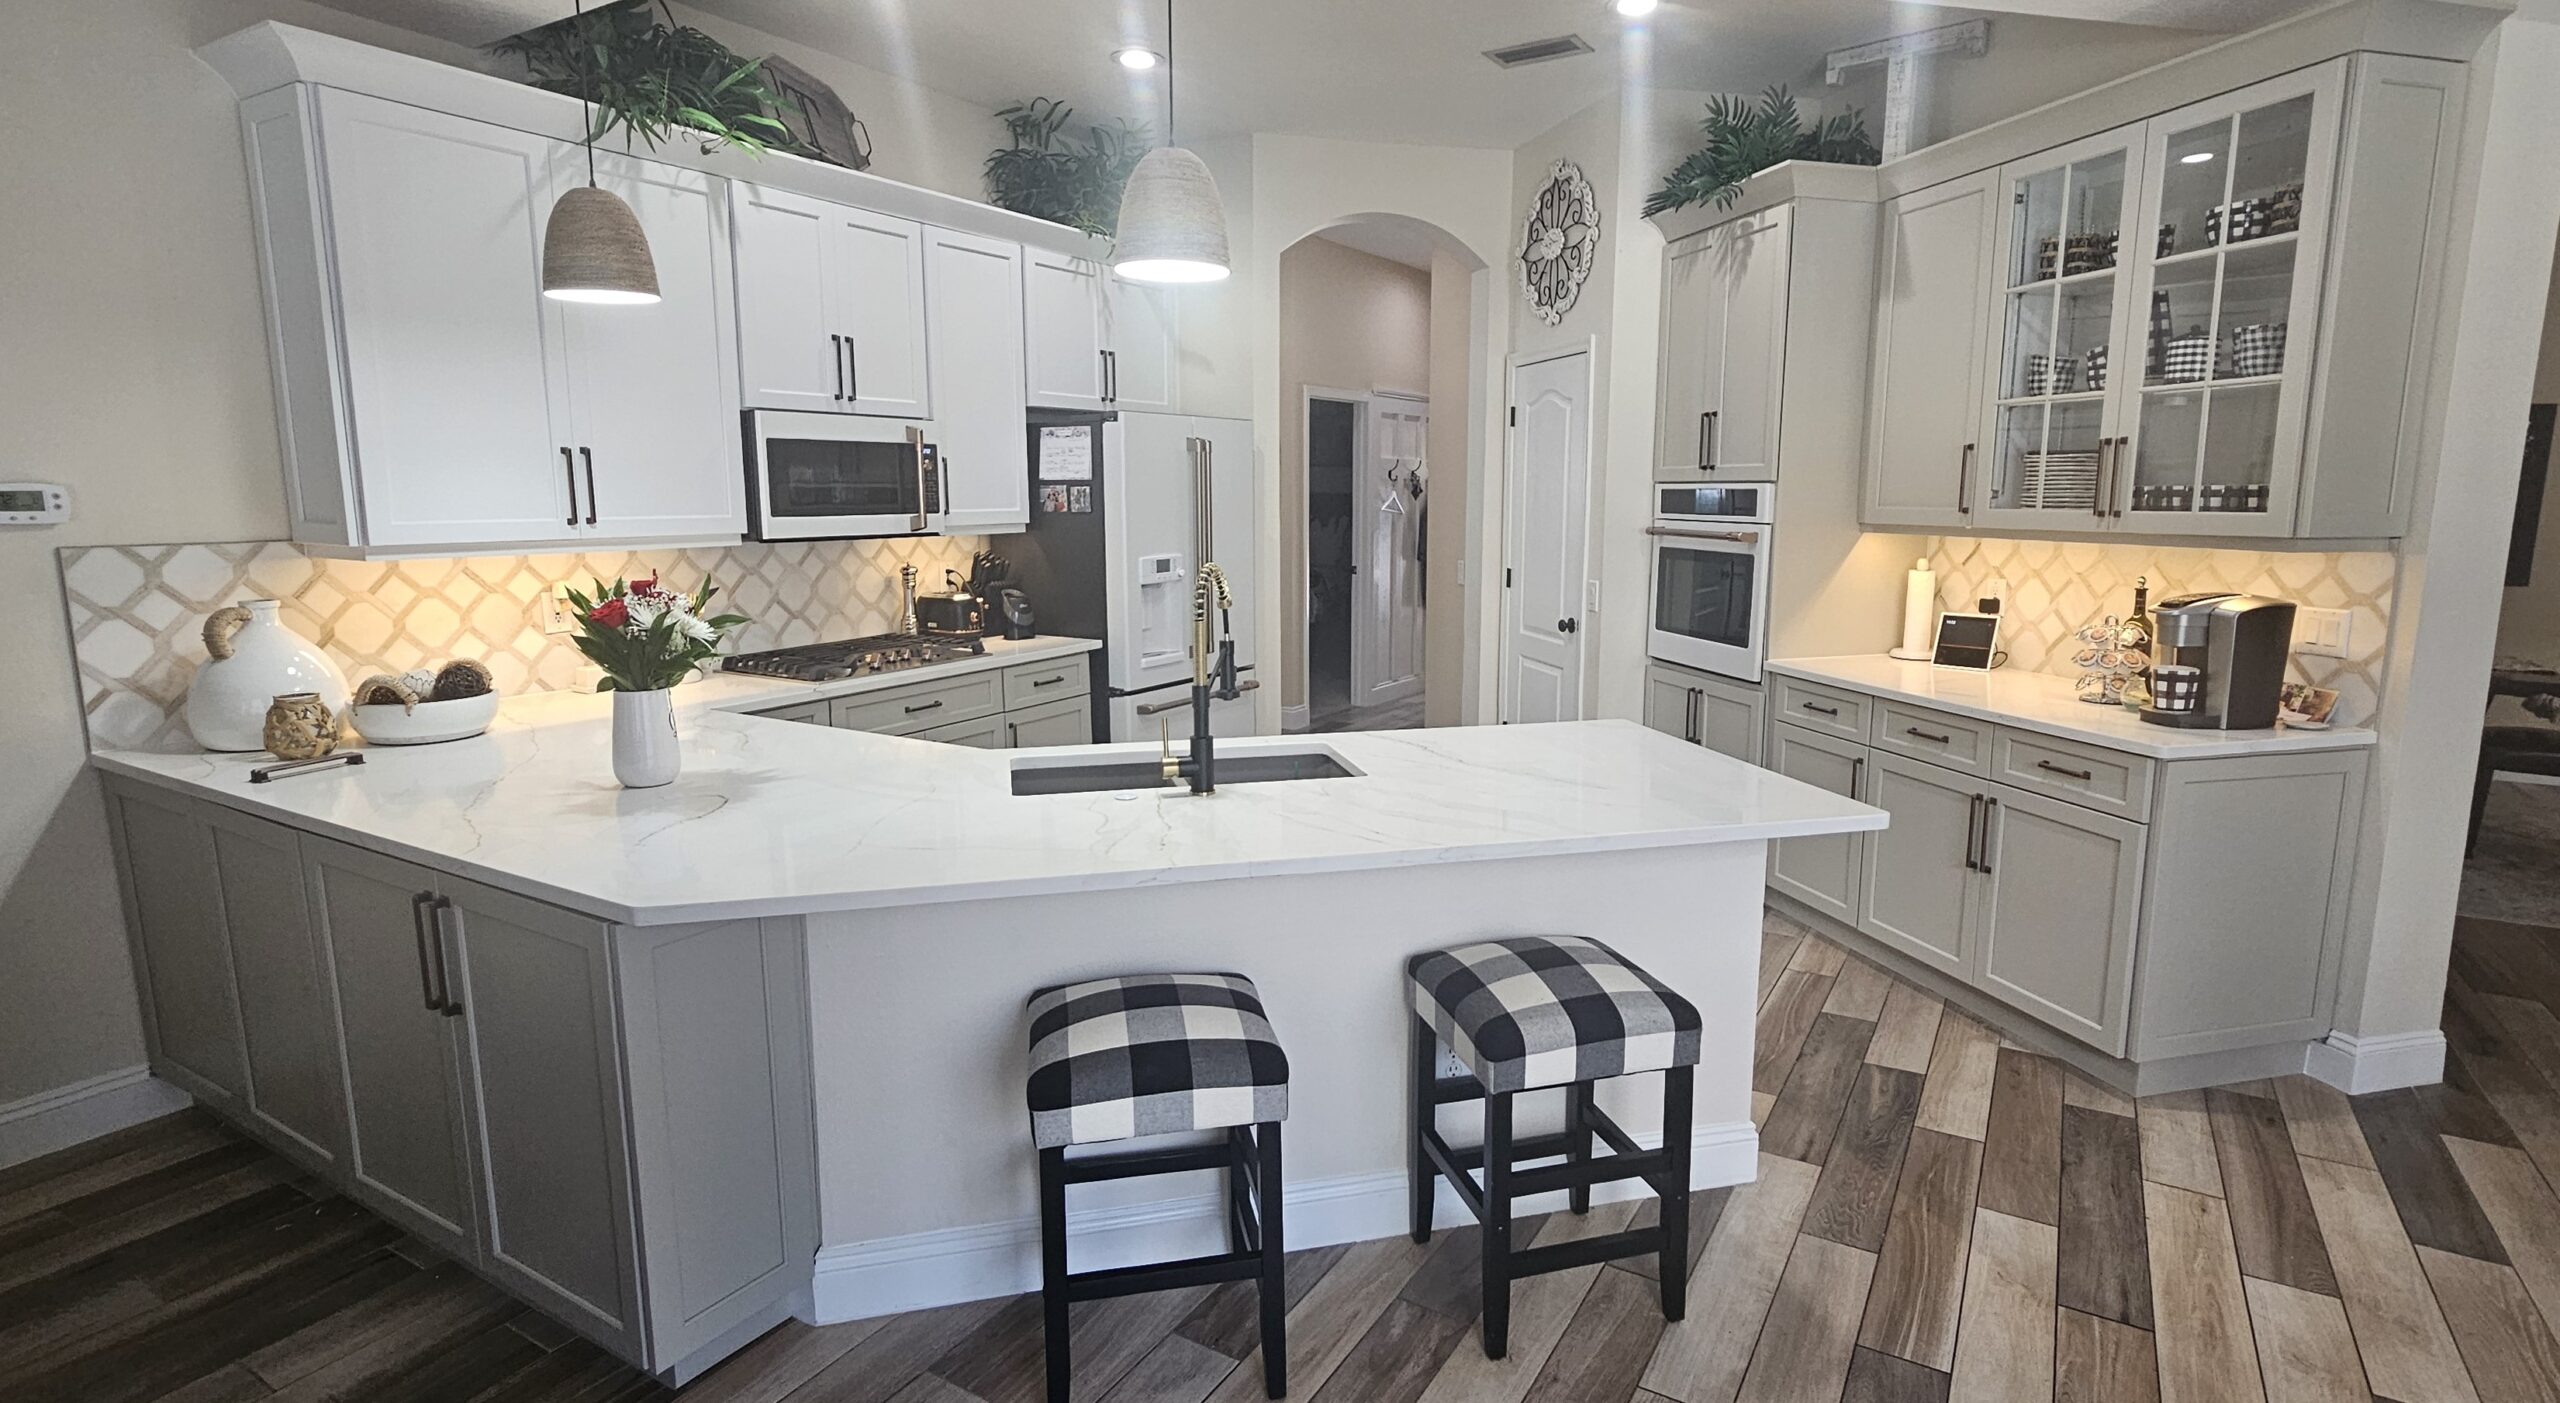 Modern appliances with a high-quality finish, granite worktops, and sleek white Kitchen Cabinets in Tampa